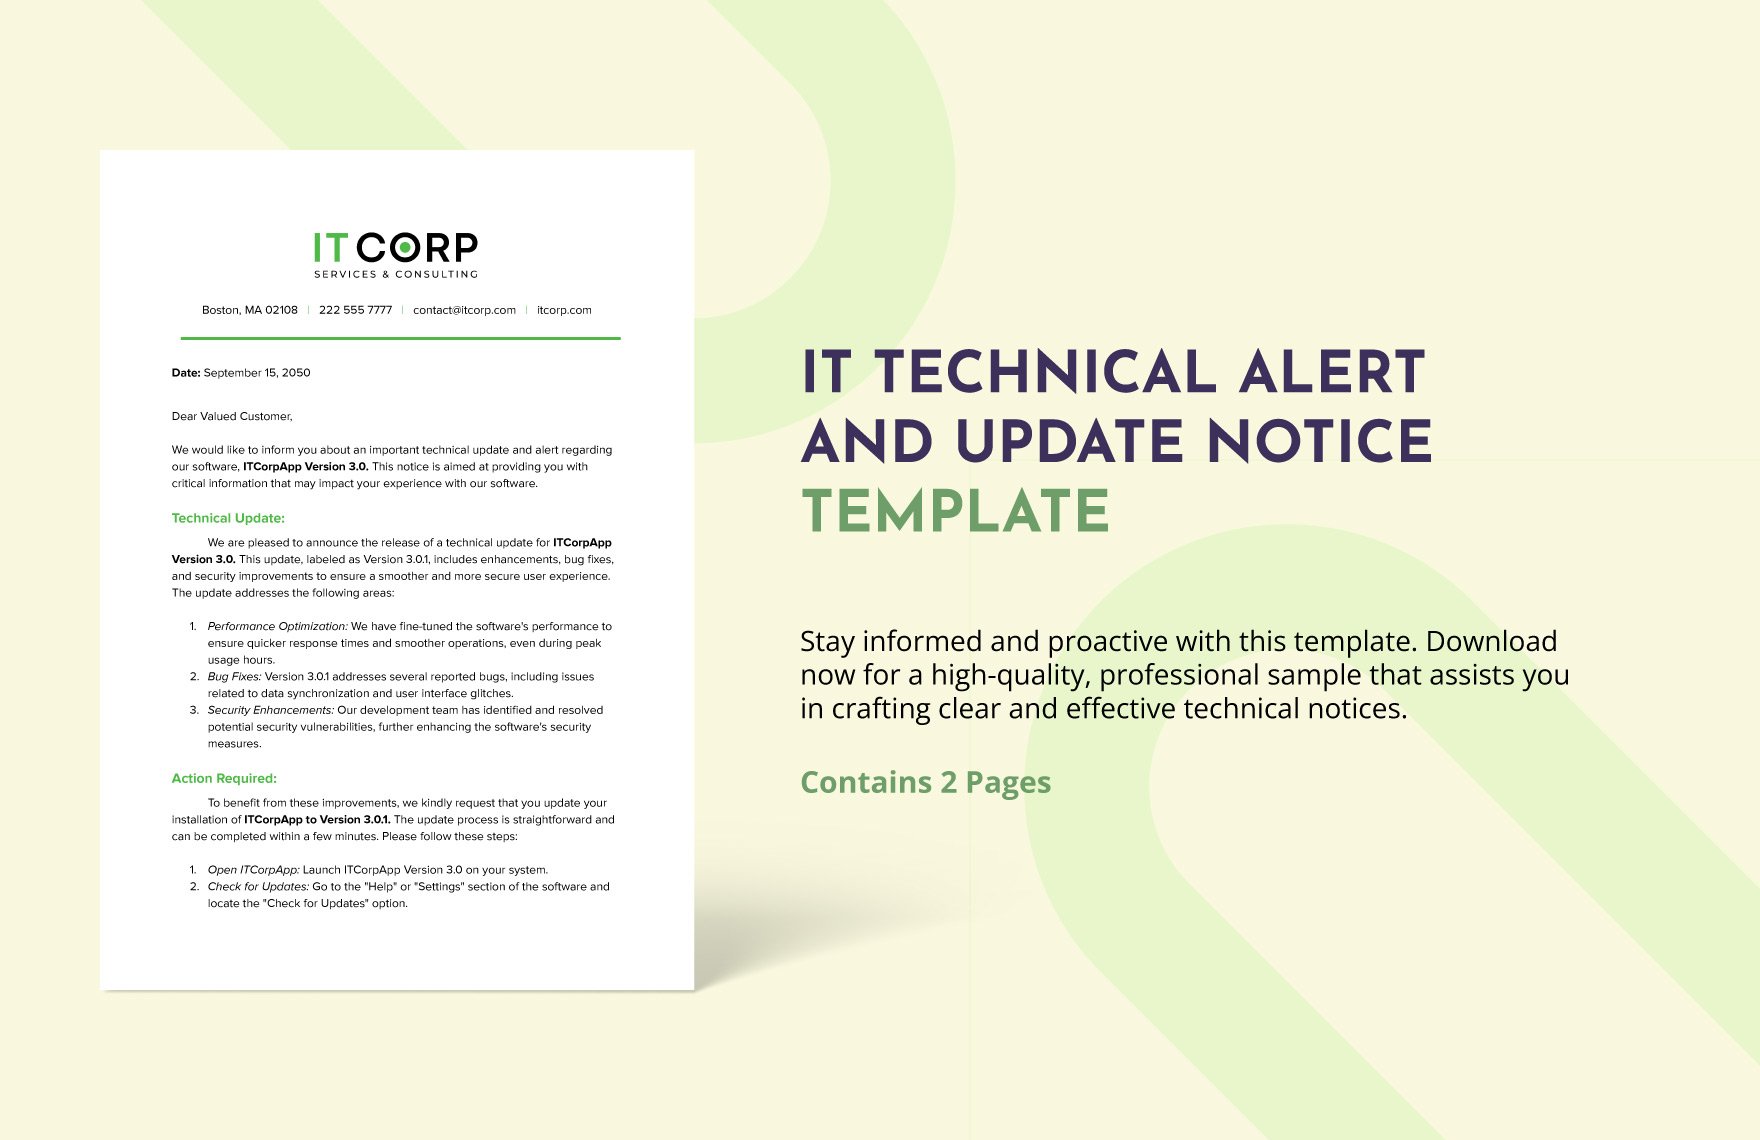 IT Technical Alert and Update Notice Template in Word, Google Docs, PDF